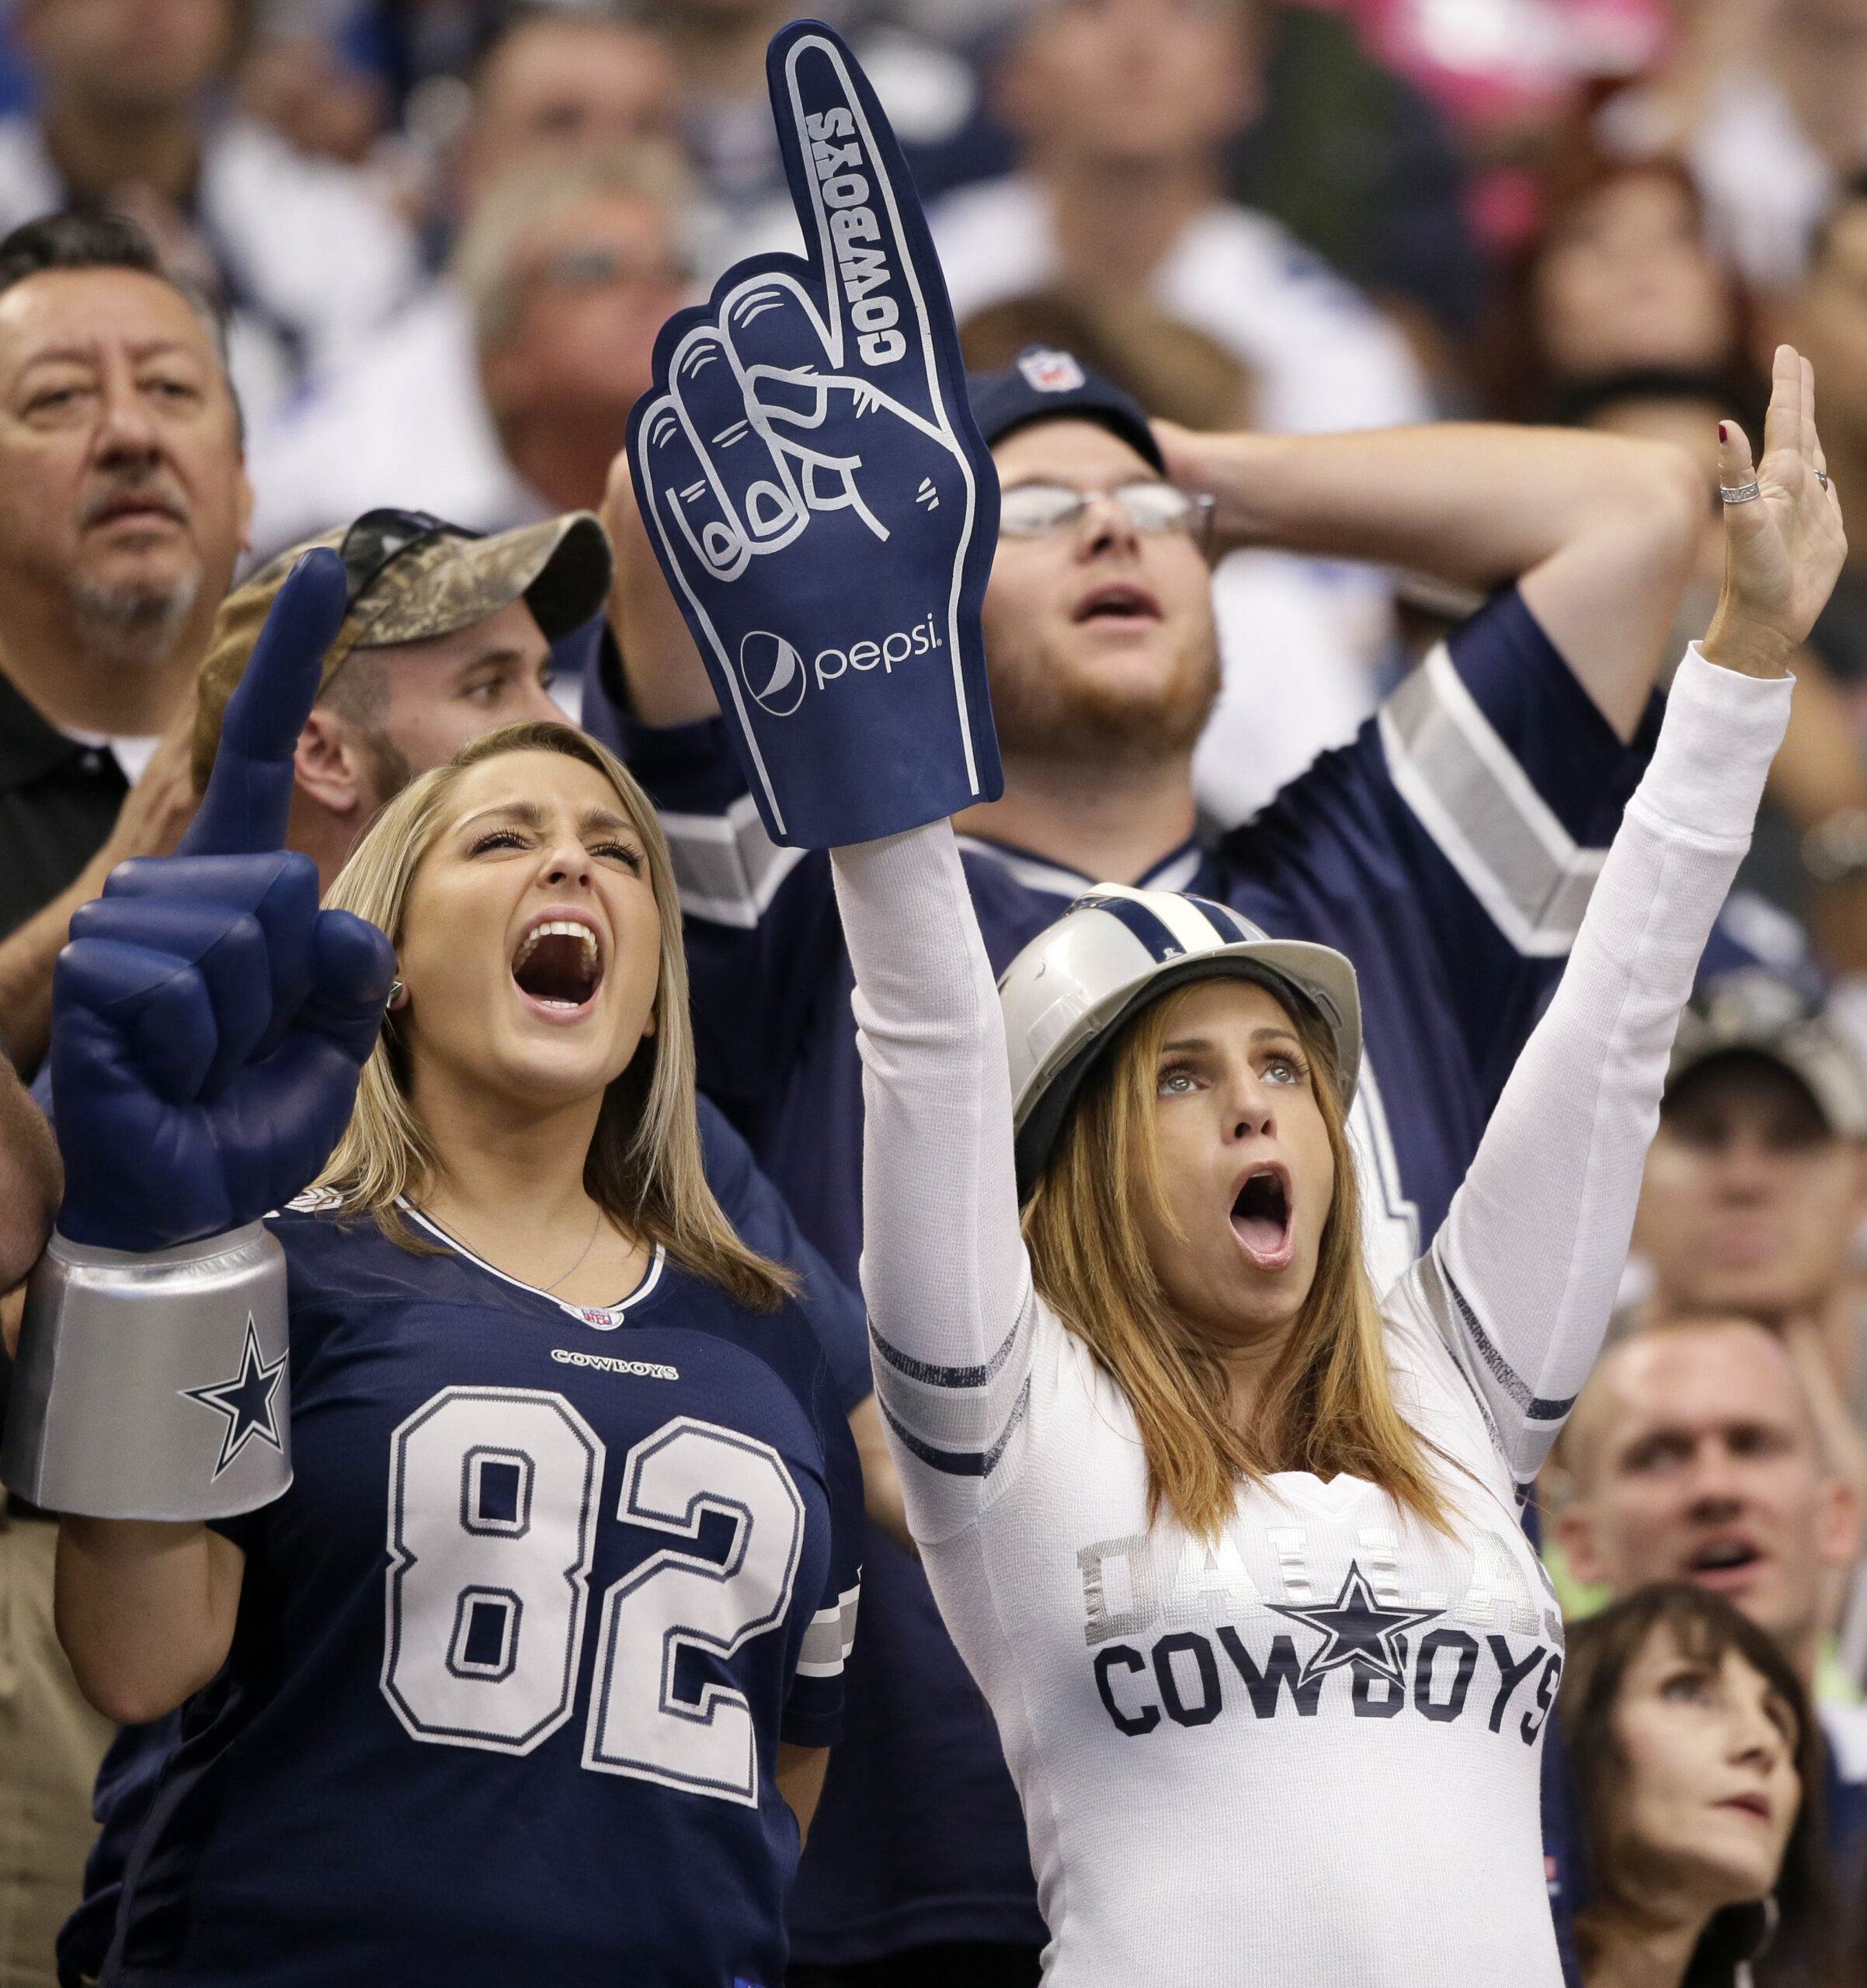 Cowboys Blog - Are You Ready To Get Loud, Cowboys Fans?